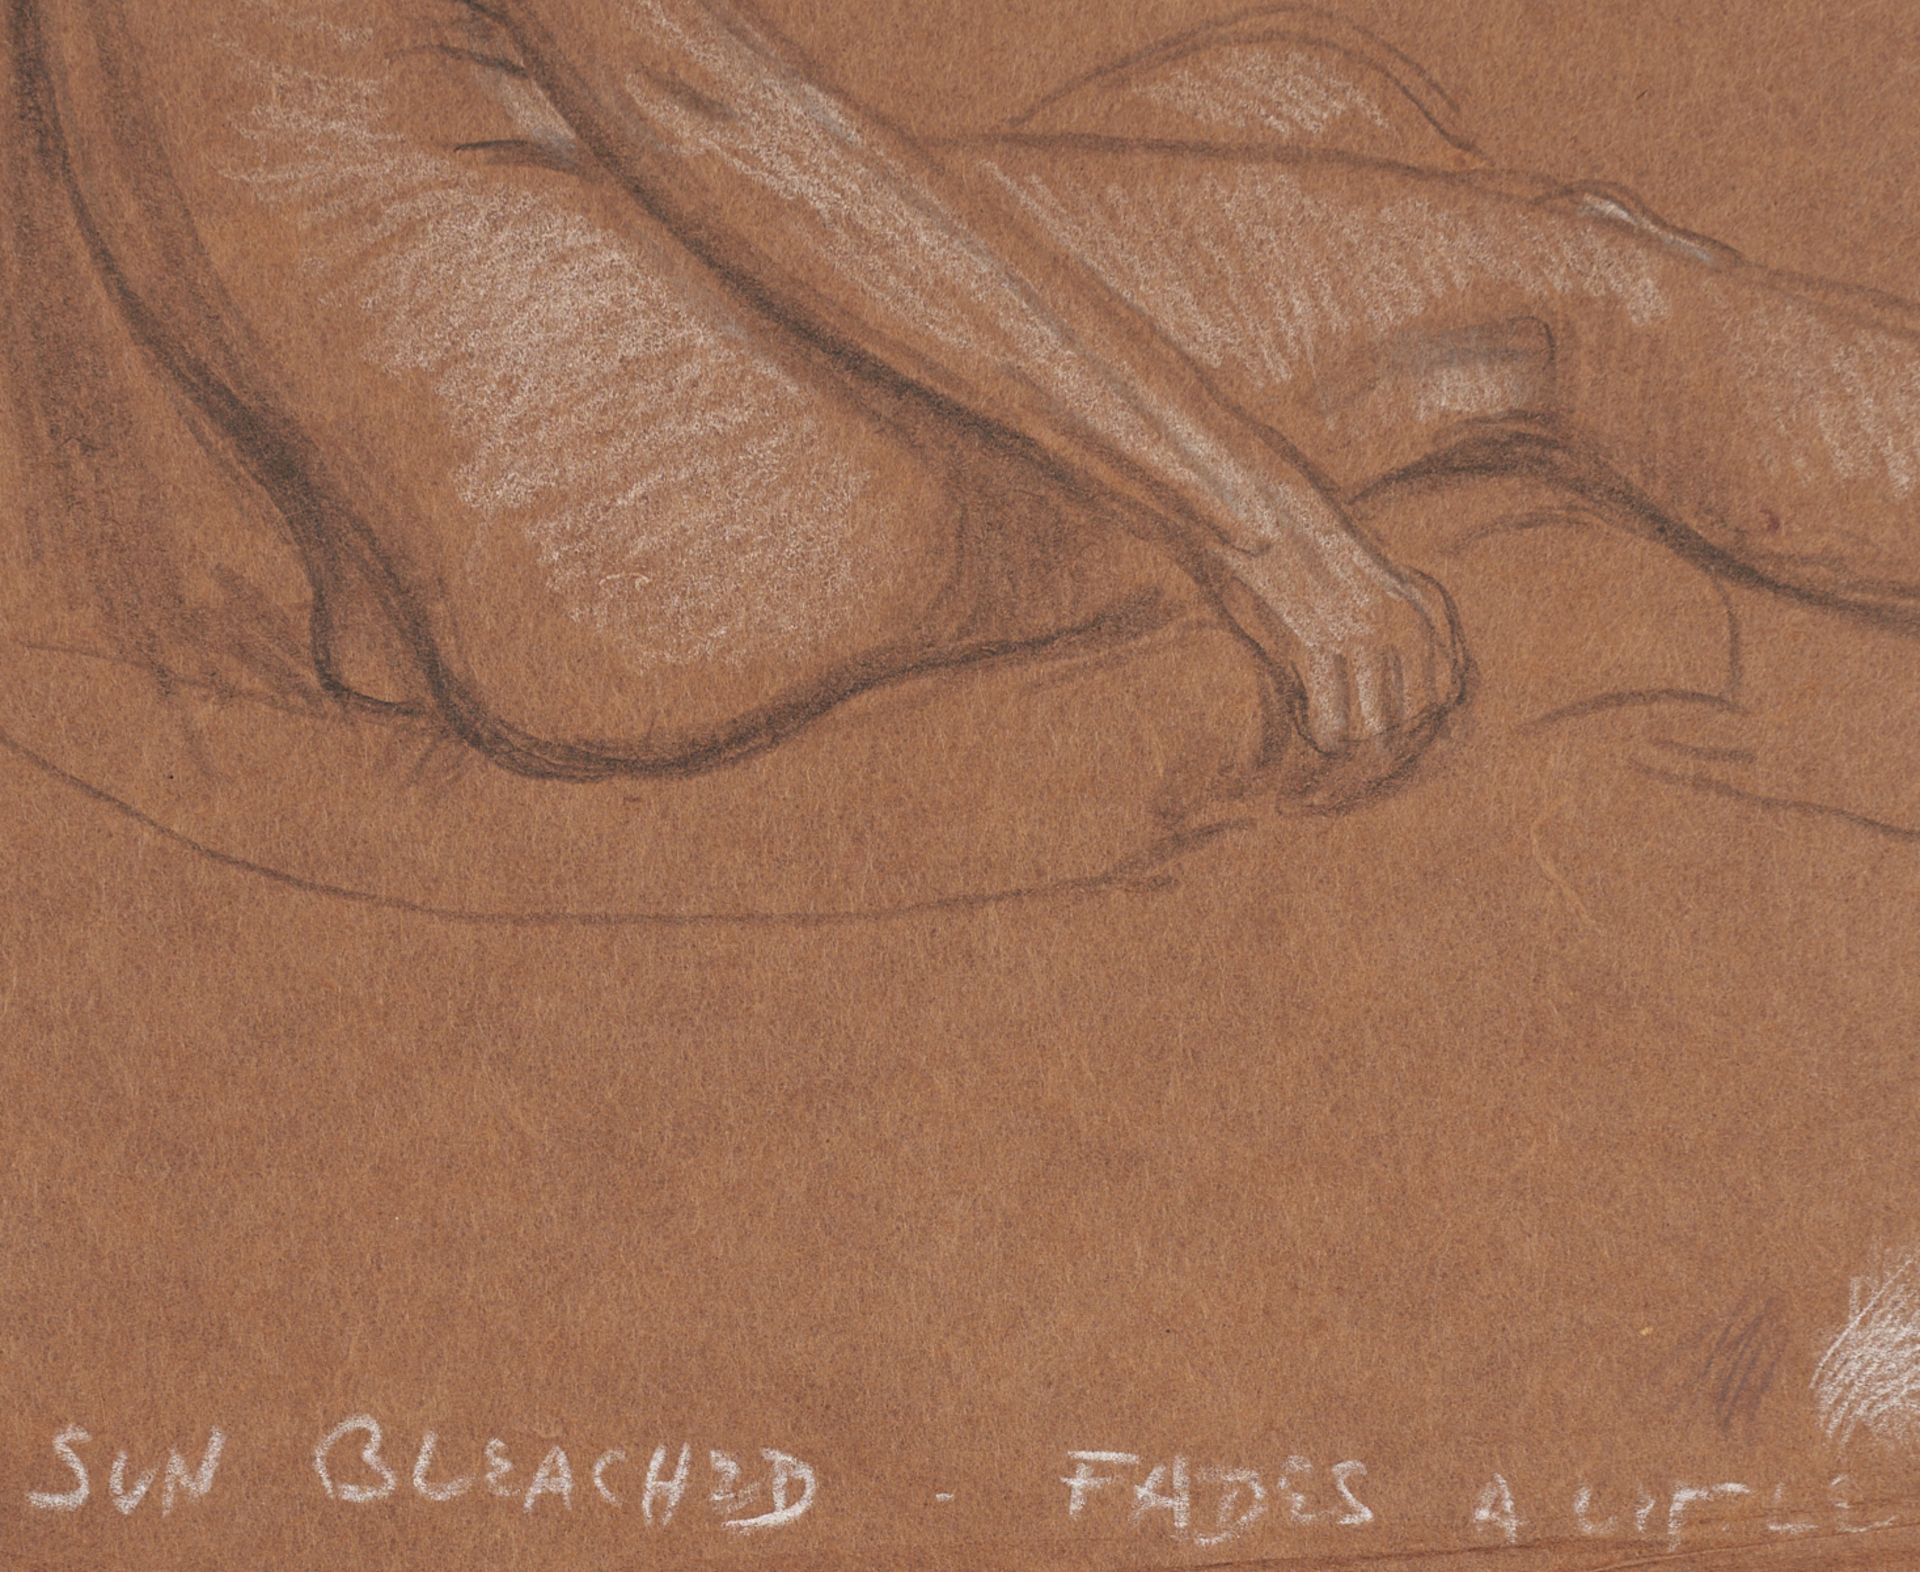 Paul Cadmus Female Nude Crayon on Paper - Image 2 of 4